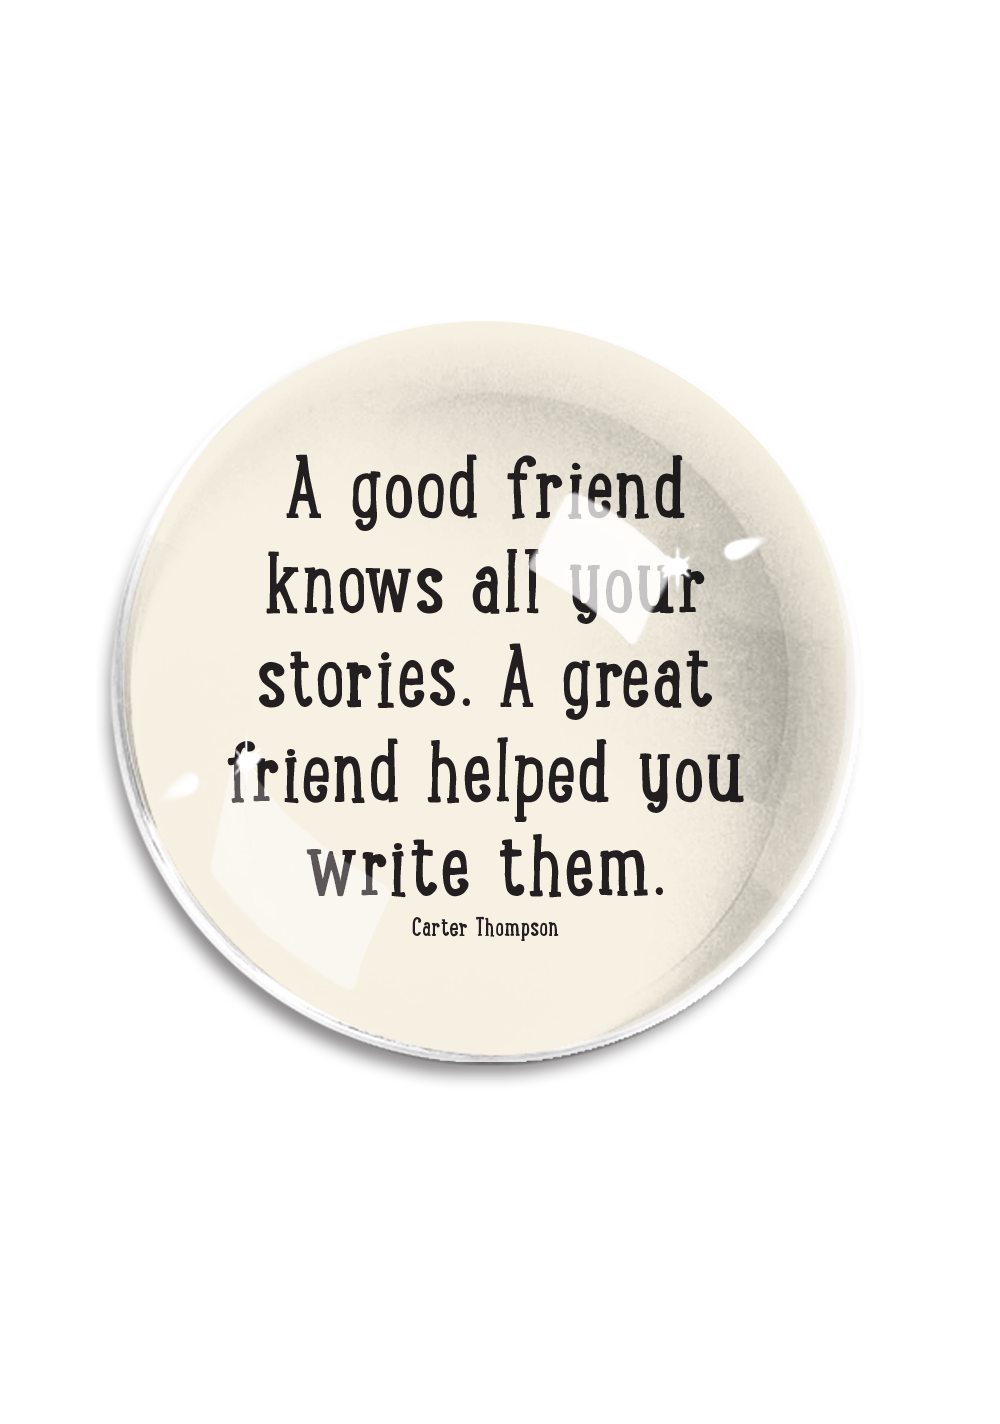 Bensgarden.com | A Good Friend Knows All Your Stories Crystal Dome Paperweight - Ben's Garden. Made in New York City.